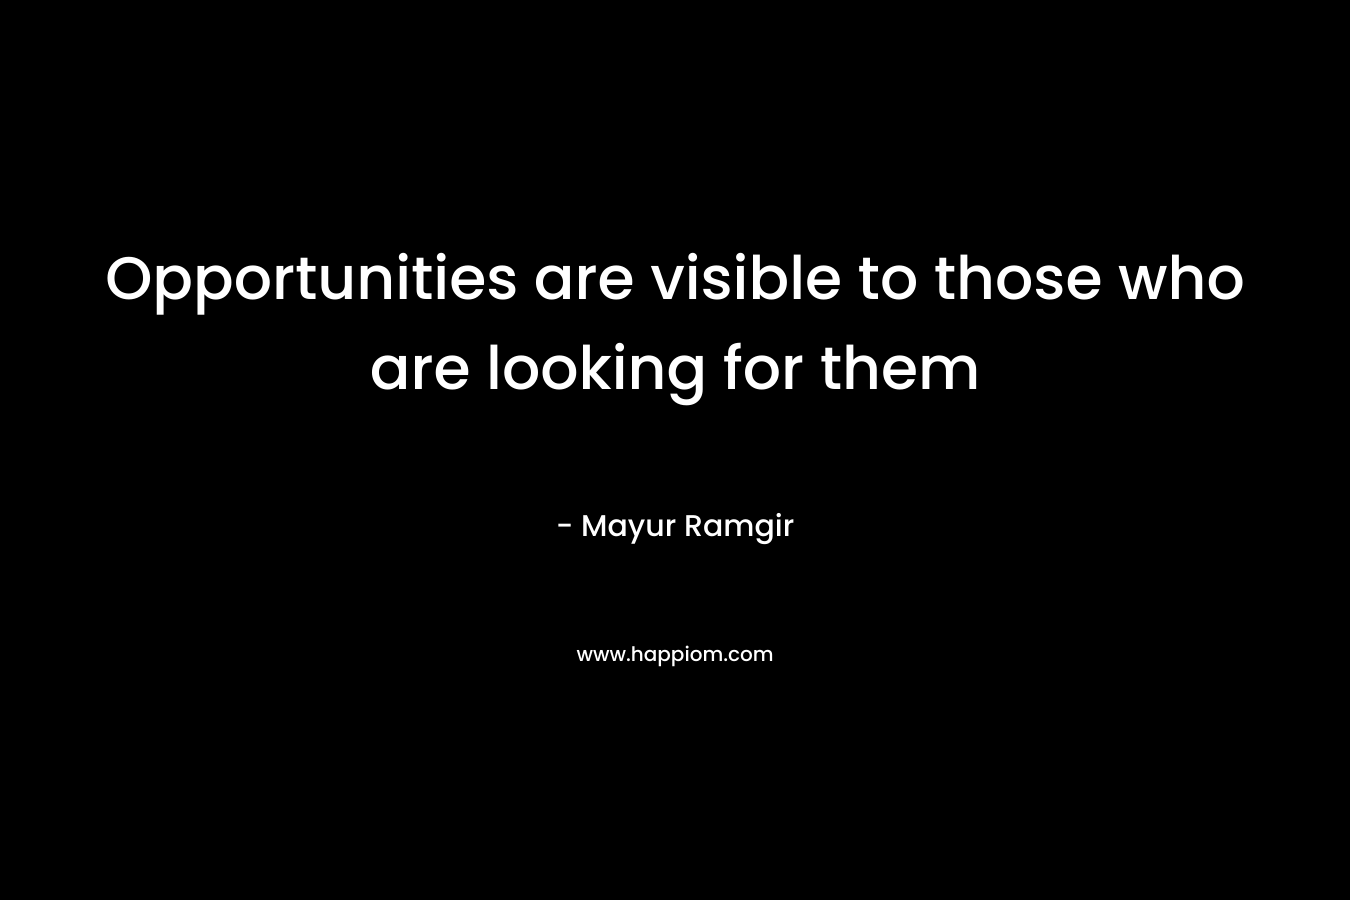 Opportunities are visible to those who are looking for them